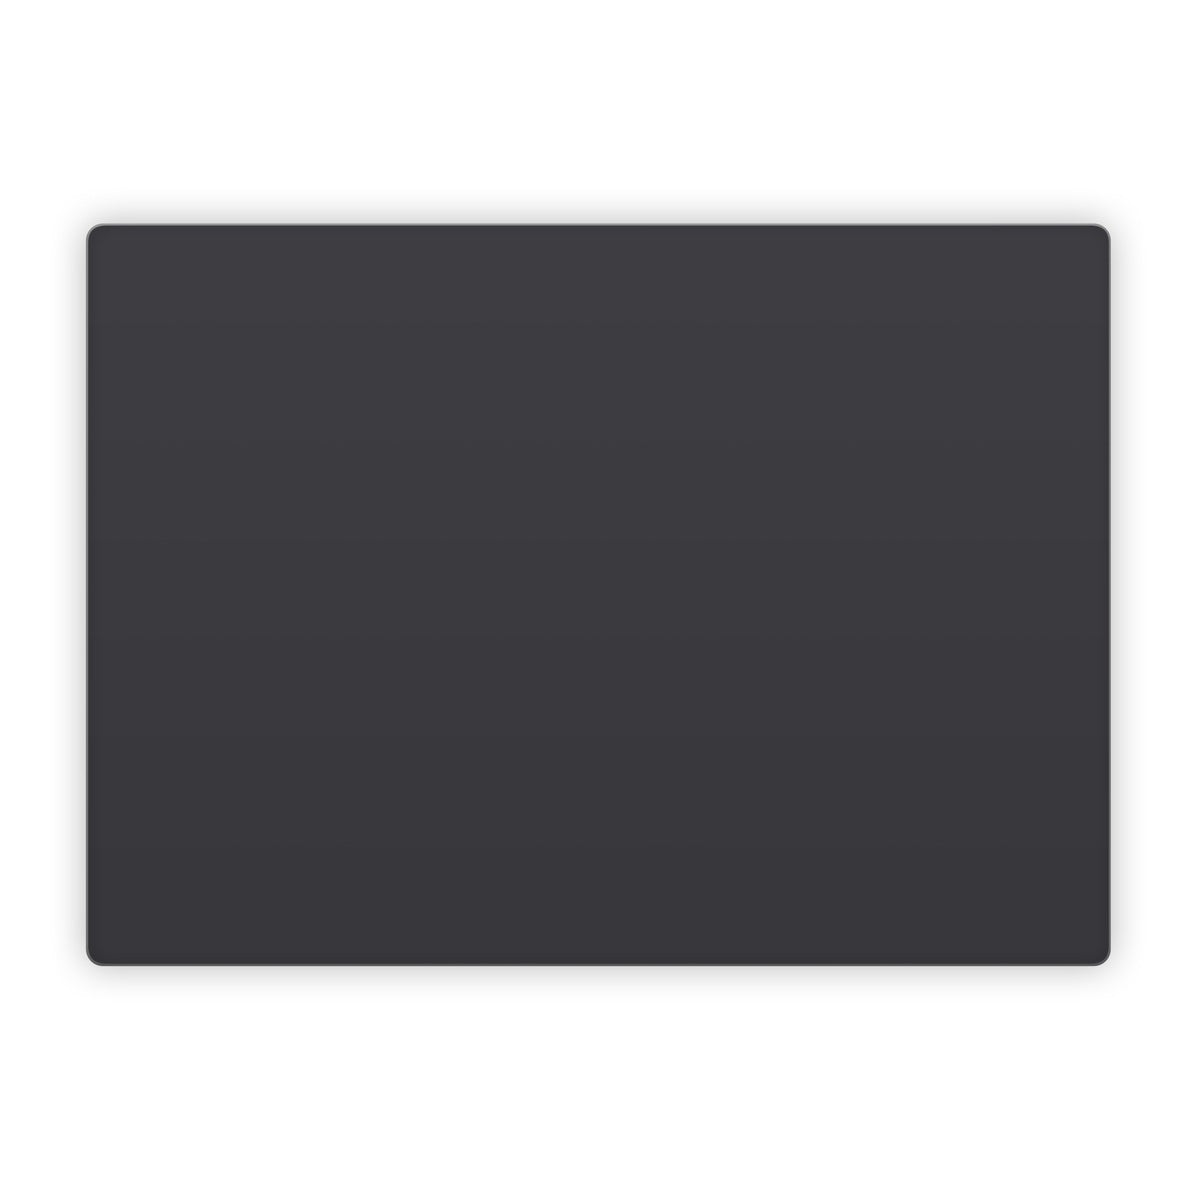 Solid State Slate Grey - Microsoft Surface Laptop Skin